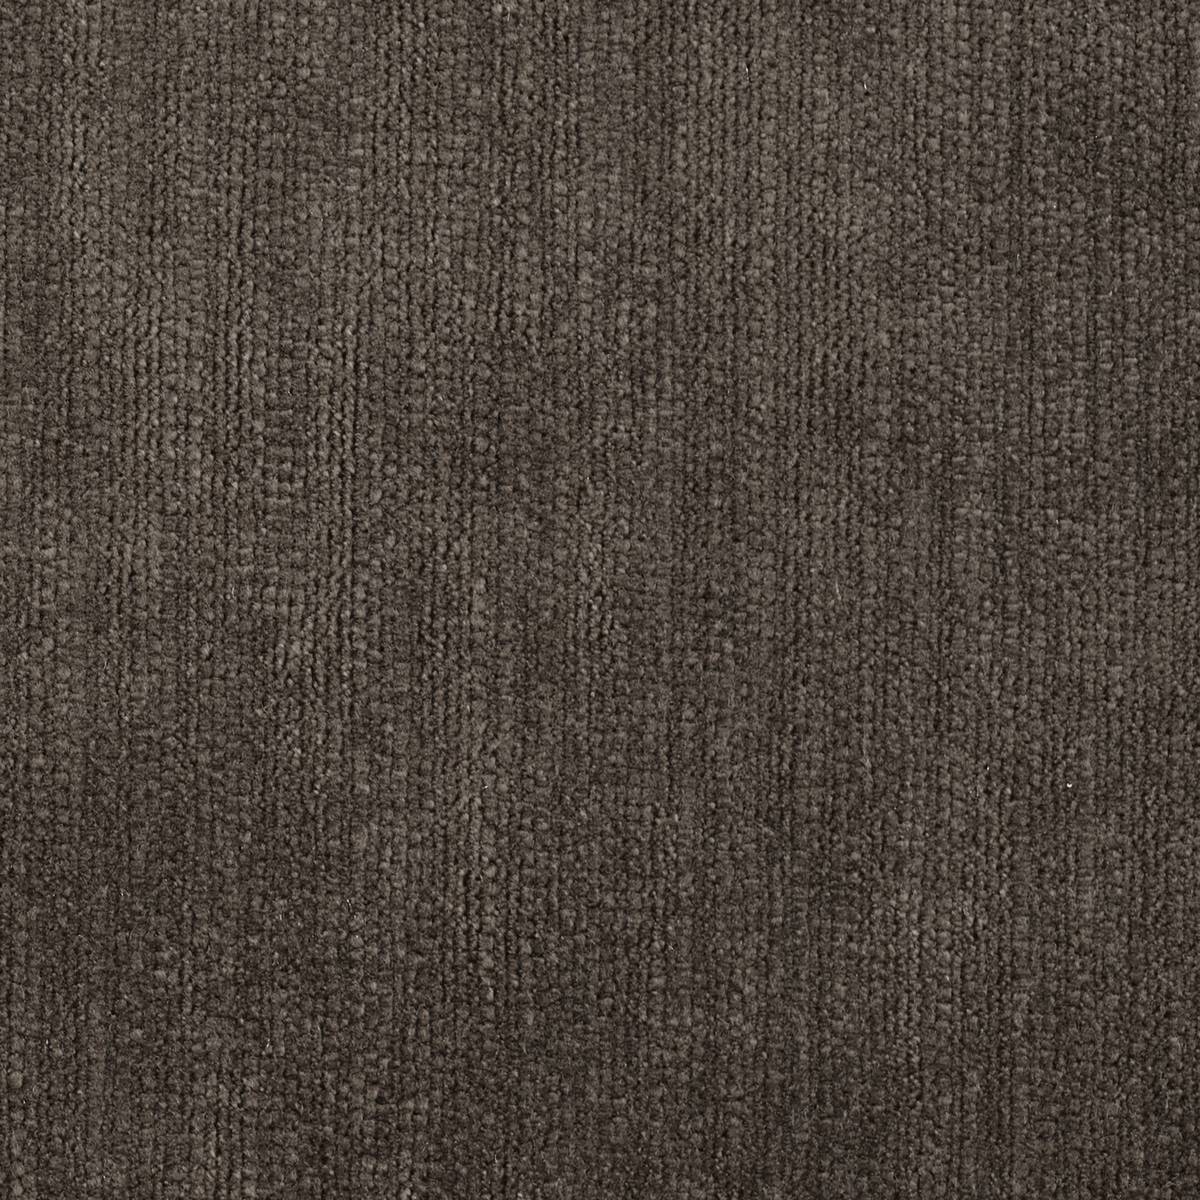 Momentum Velvets Cocoa Fabric by Harlequin